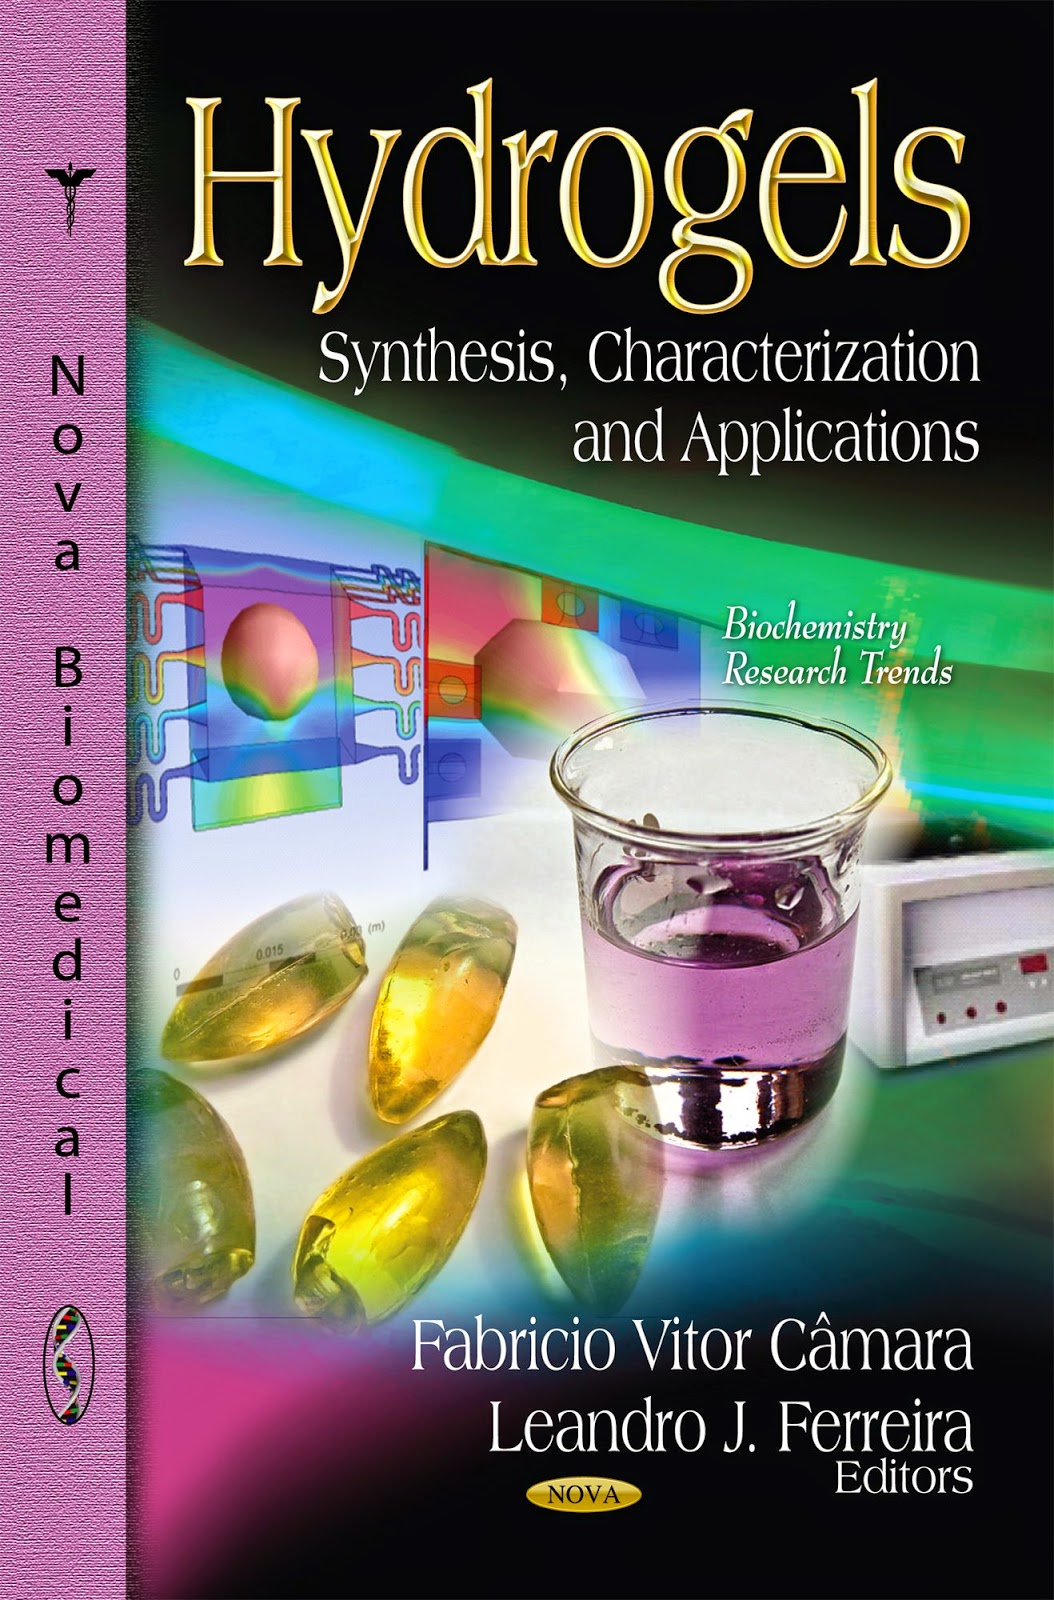 http://kingcheapebook.blogspot.com/2014/08/hydrogels-synthesis-characterization.html